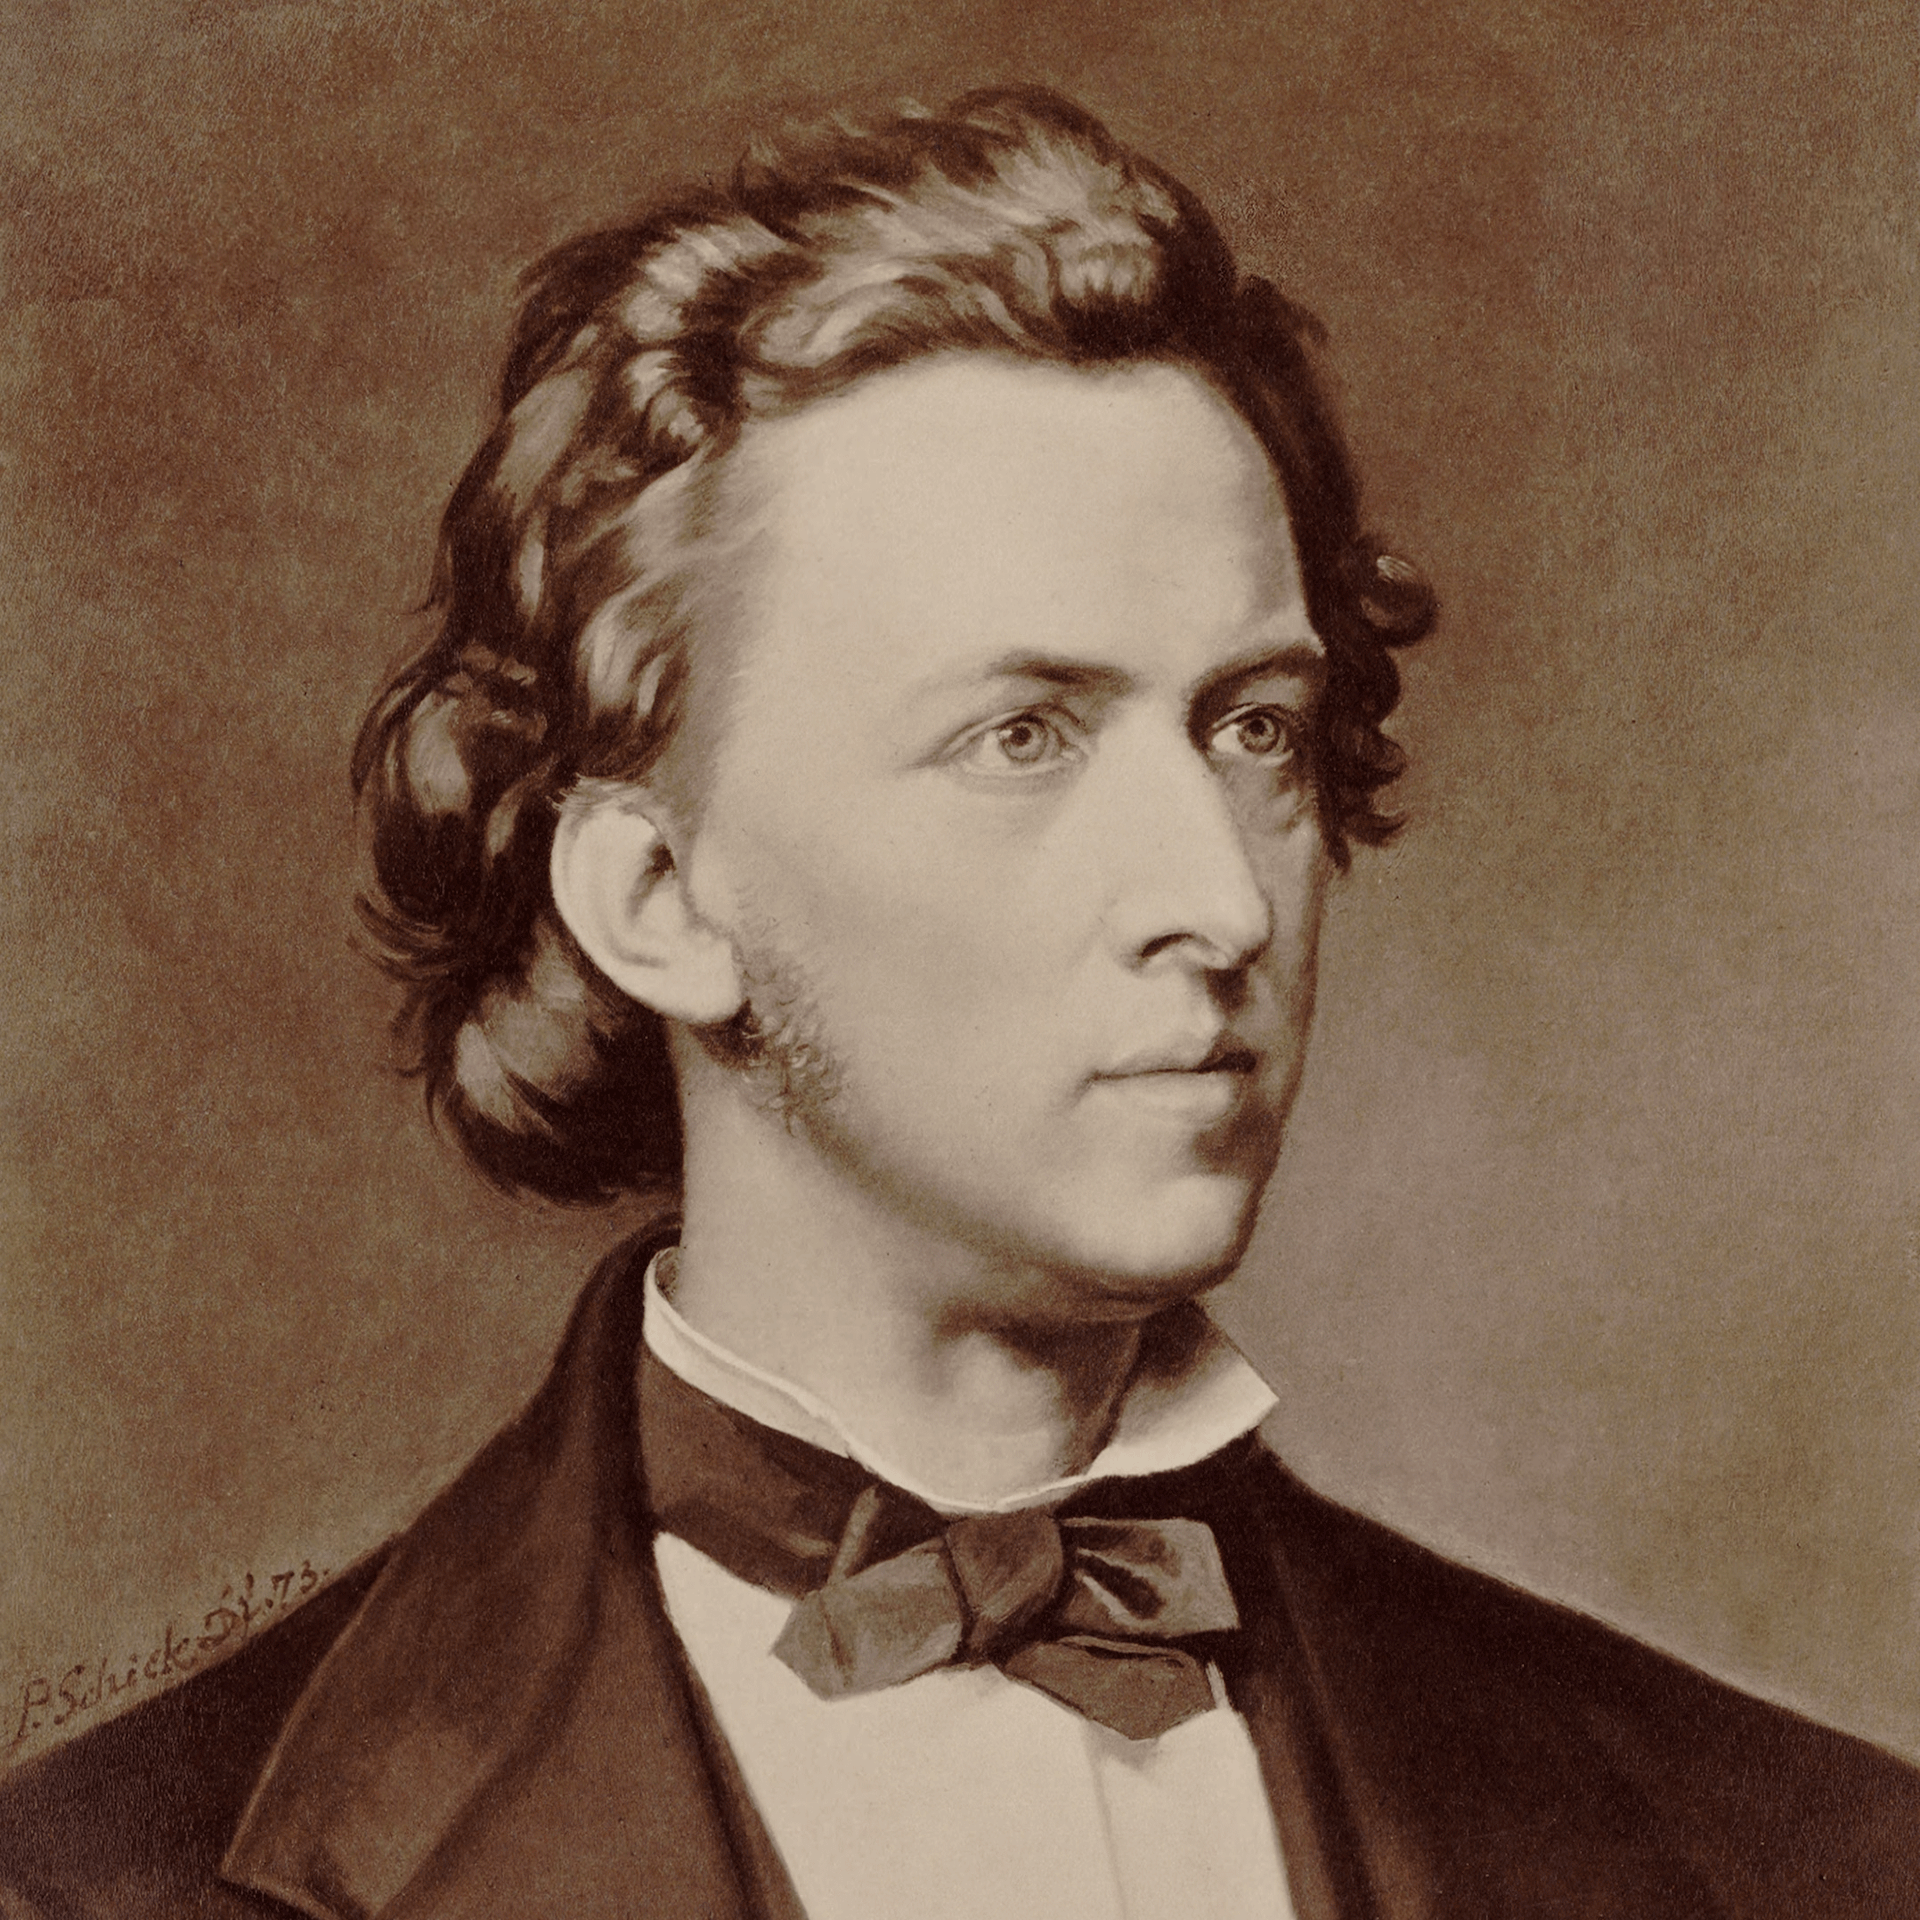 The Life Story of Frédéric Chopin